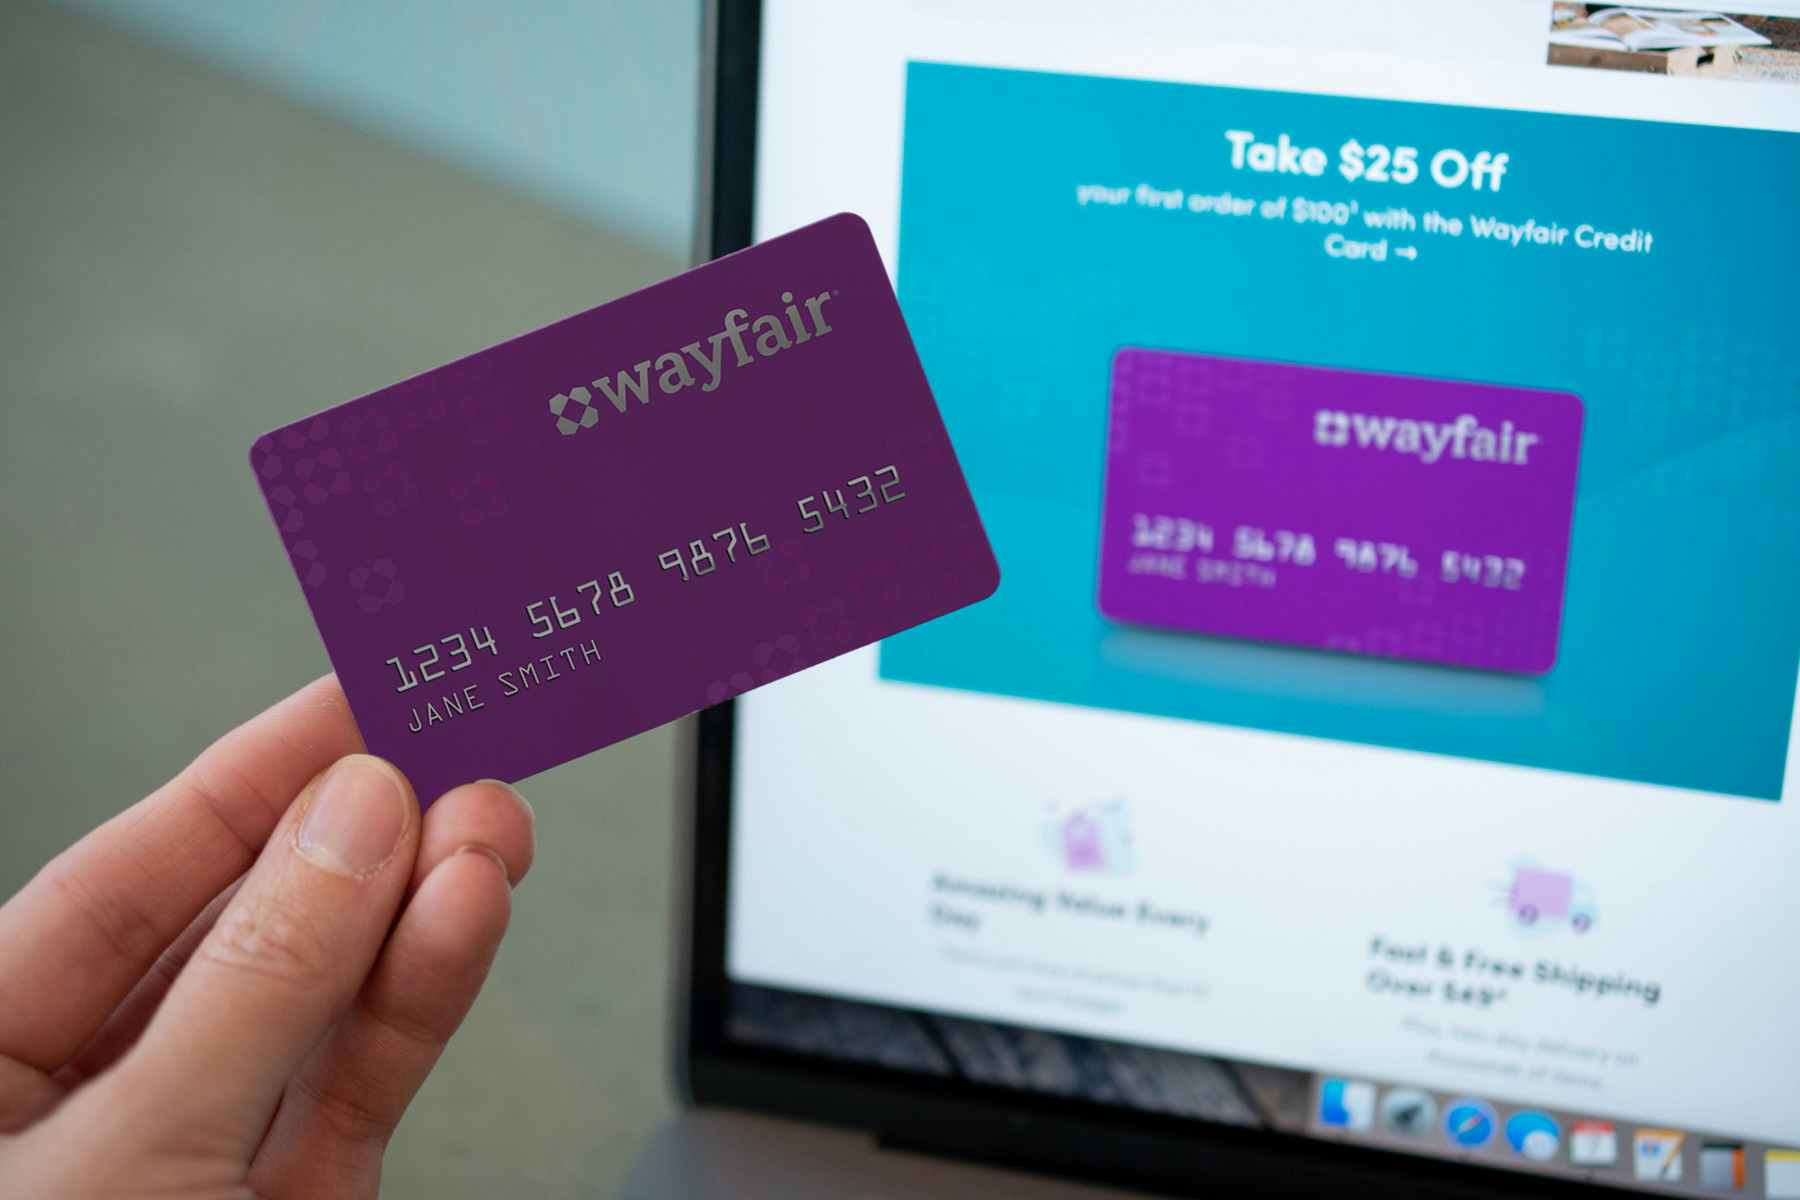 The Wayfair Credit Card only gets you a measly 3% cash back on future purchases.